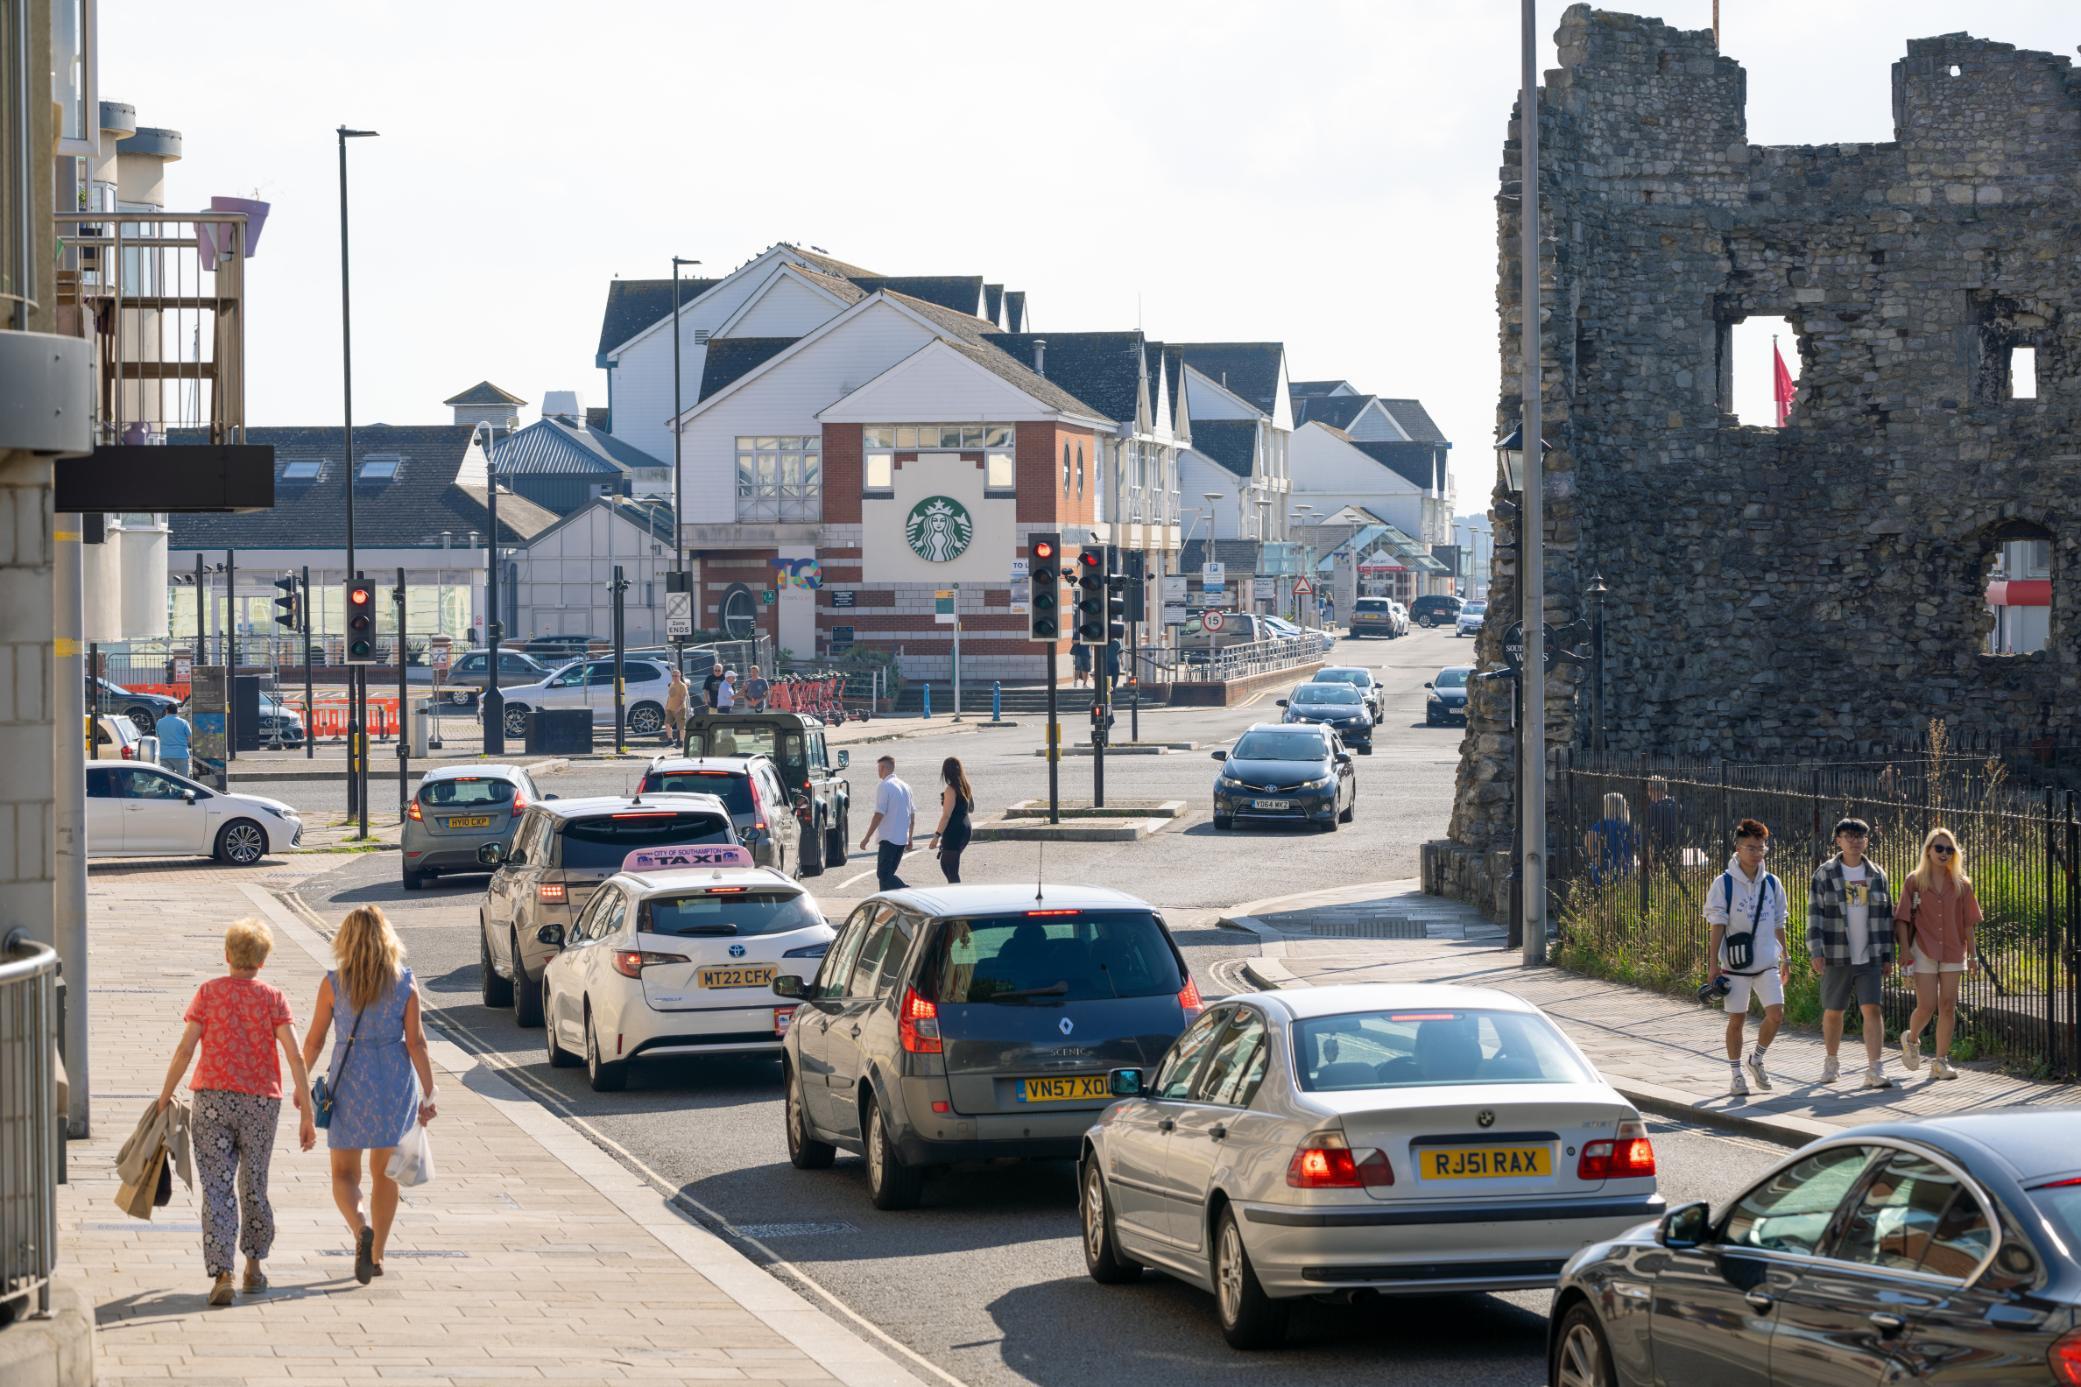 Cars stopped a red traffic light in Town Quay on sunny day